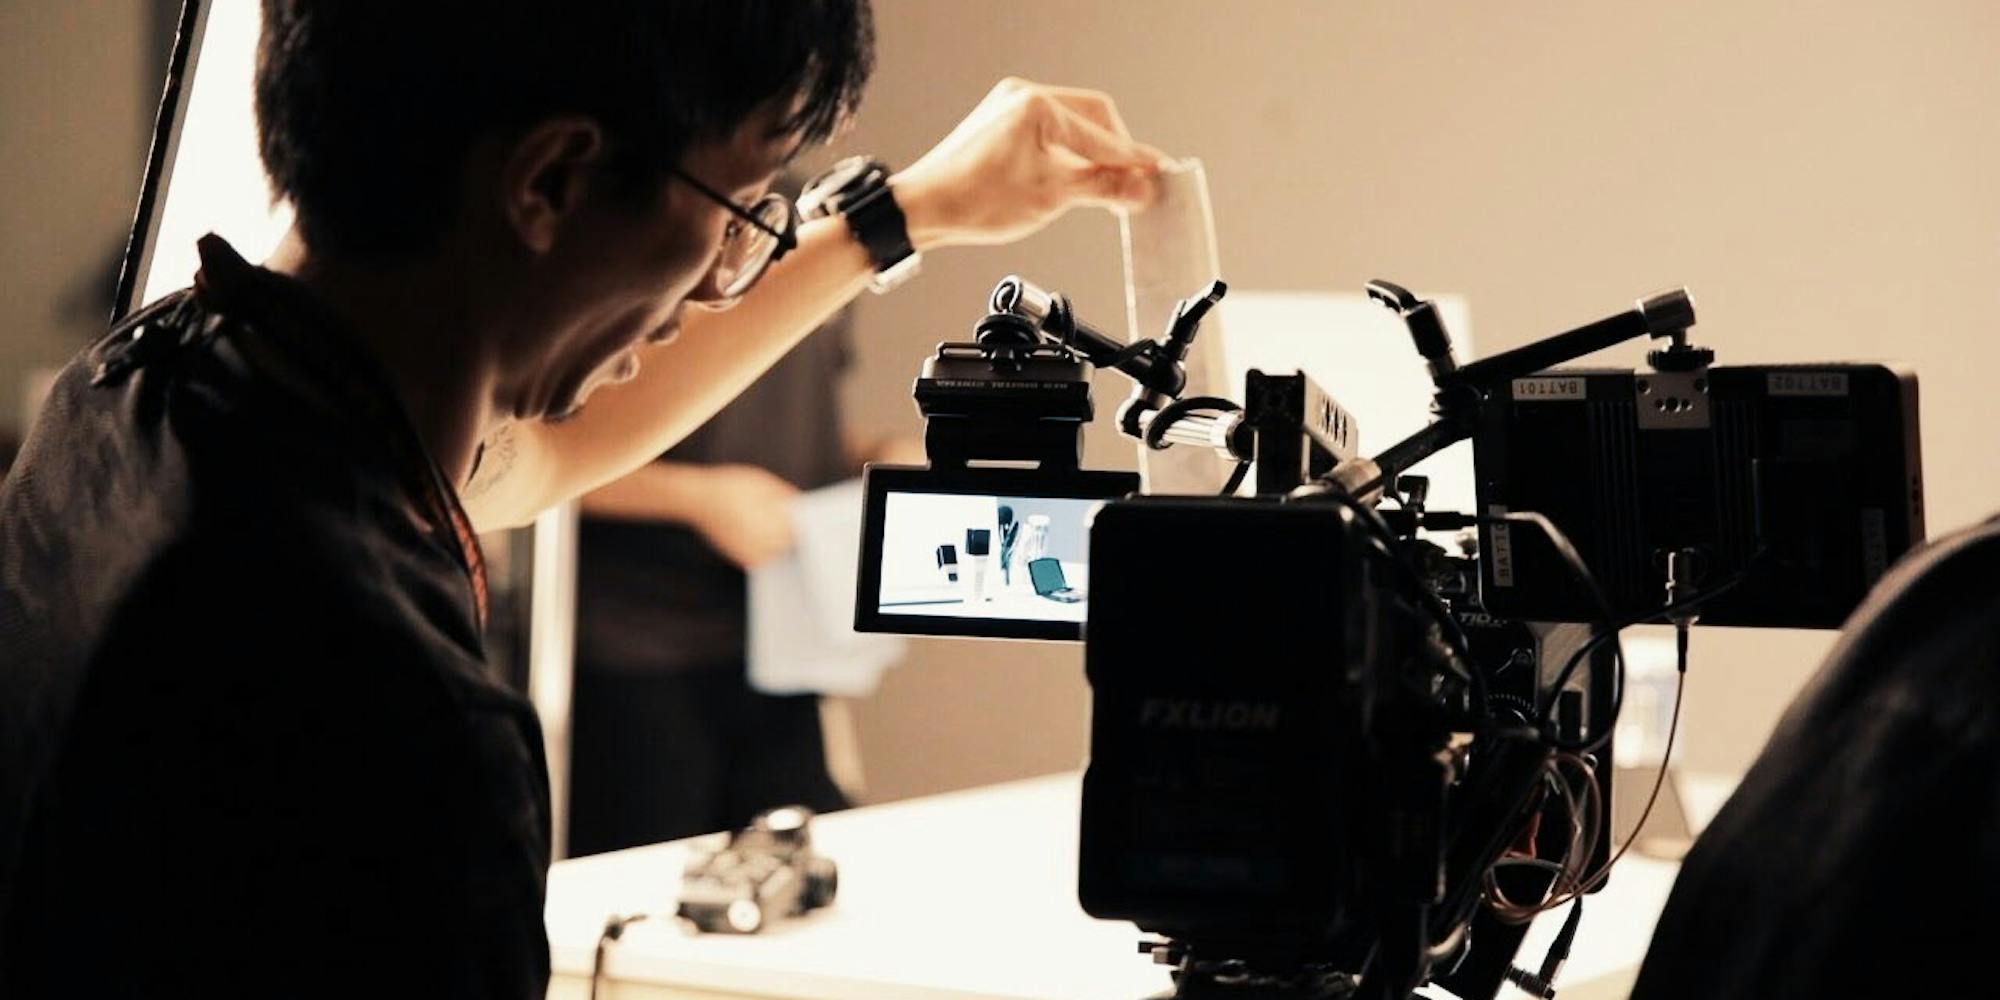 Guy filming a product shoot